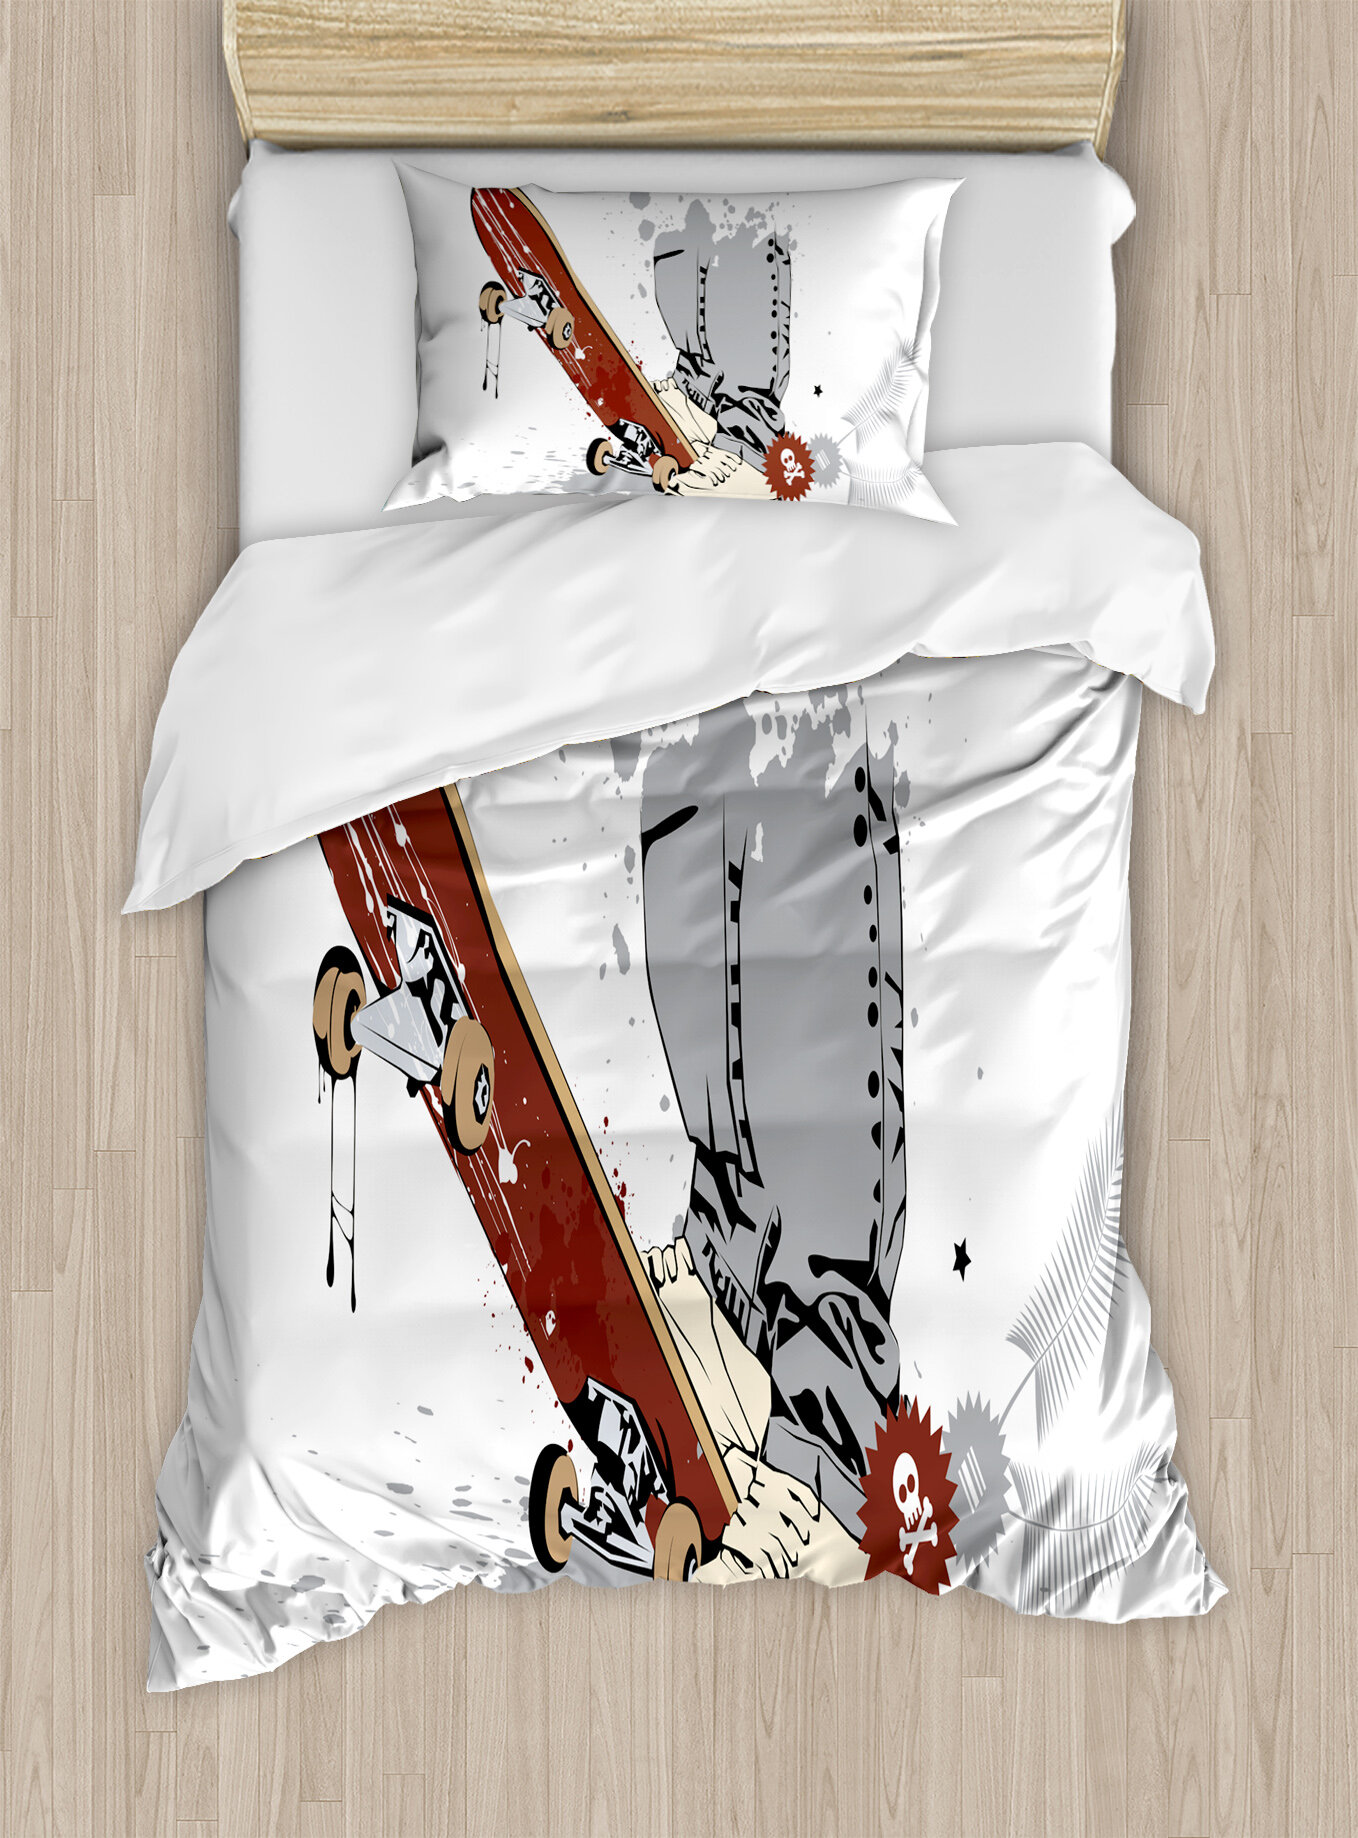 East Urban Home Skateboard With Feet In Sneakers Duvet Cover Set